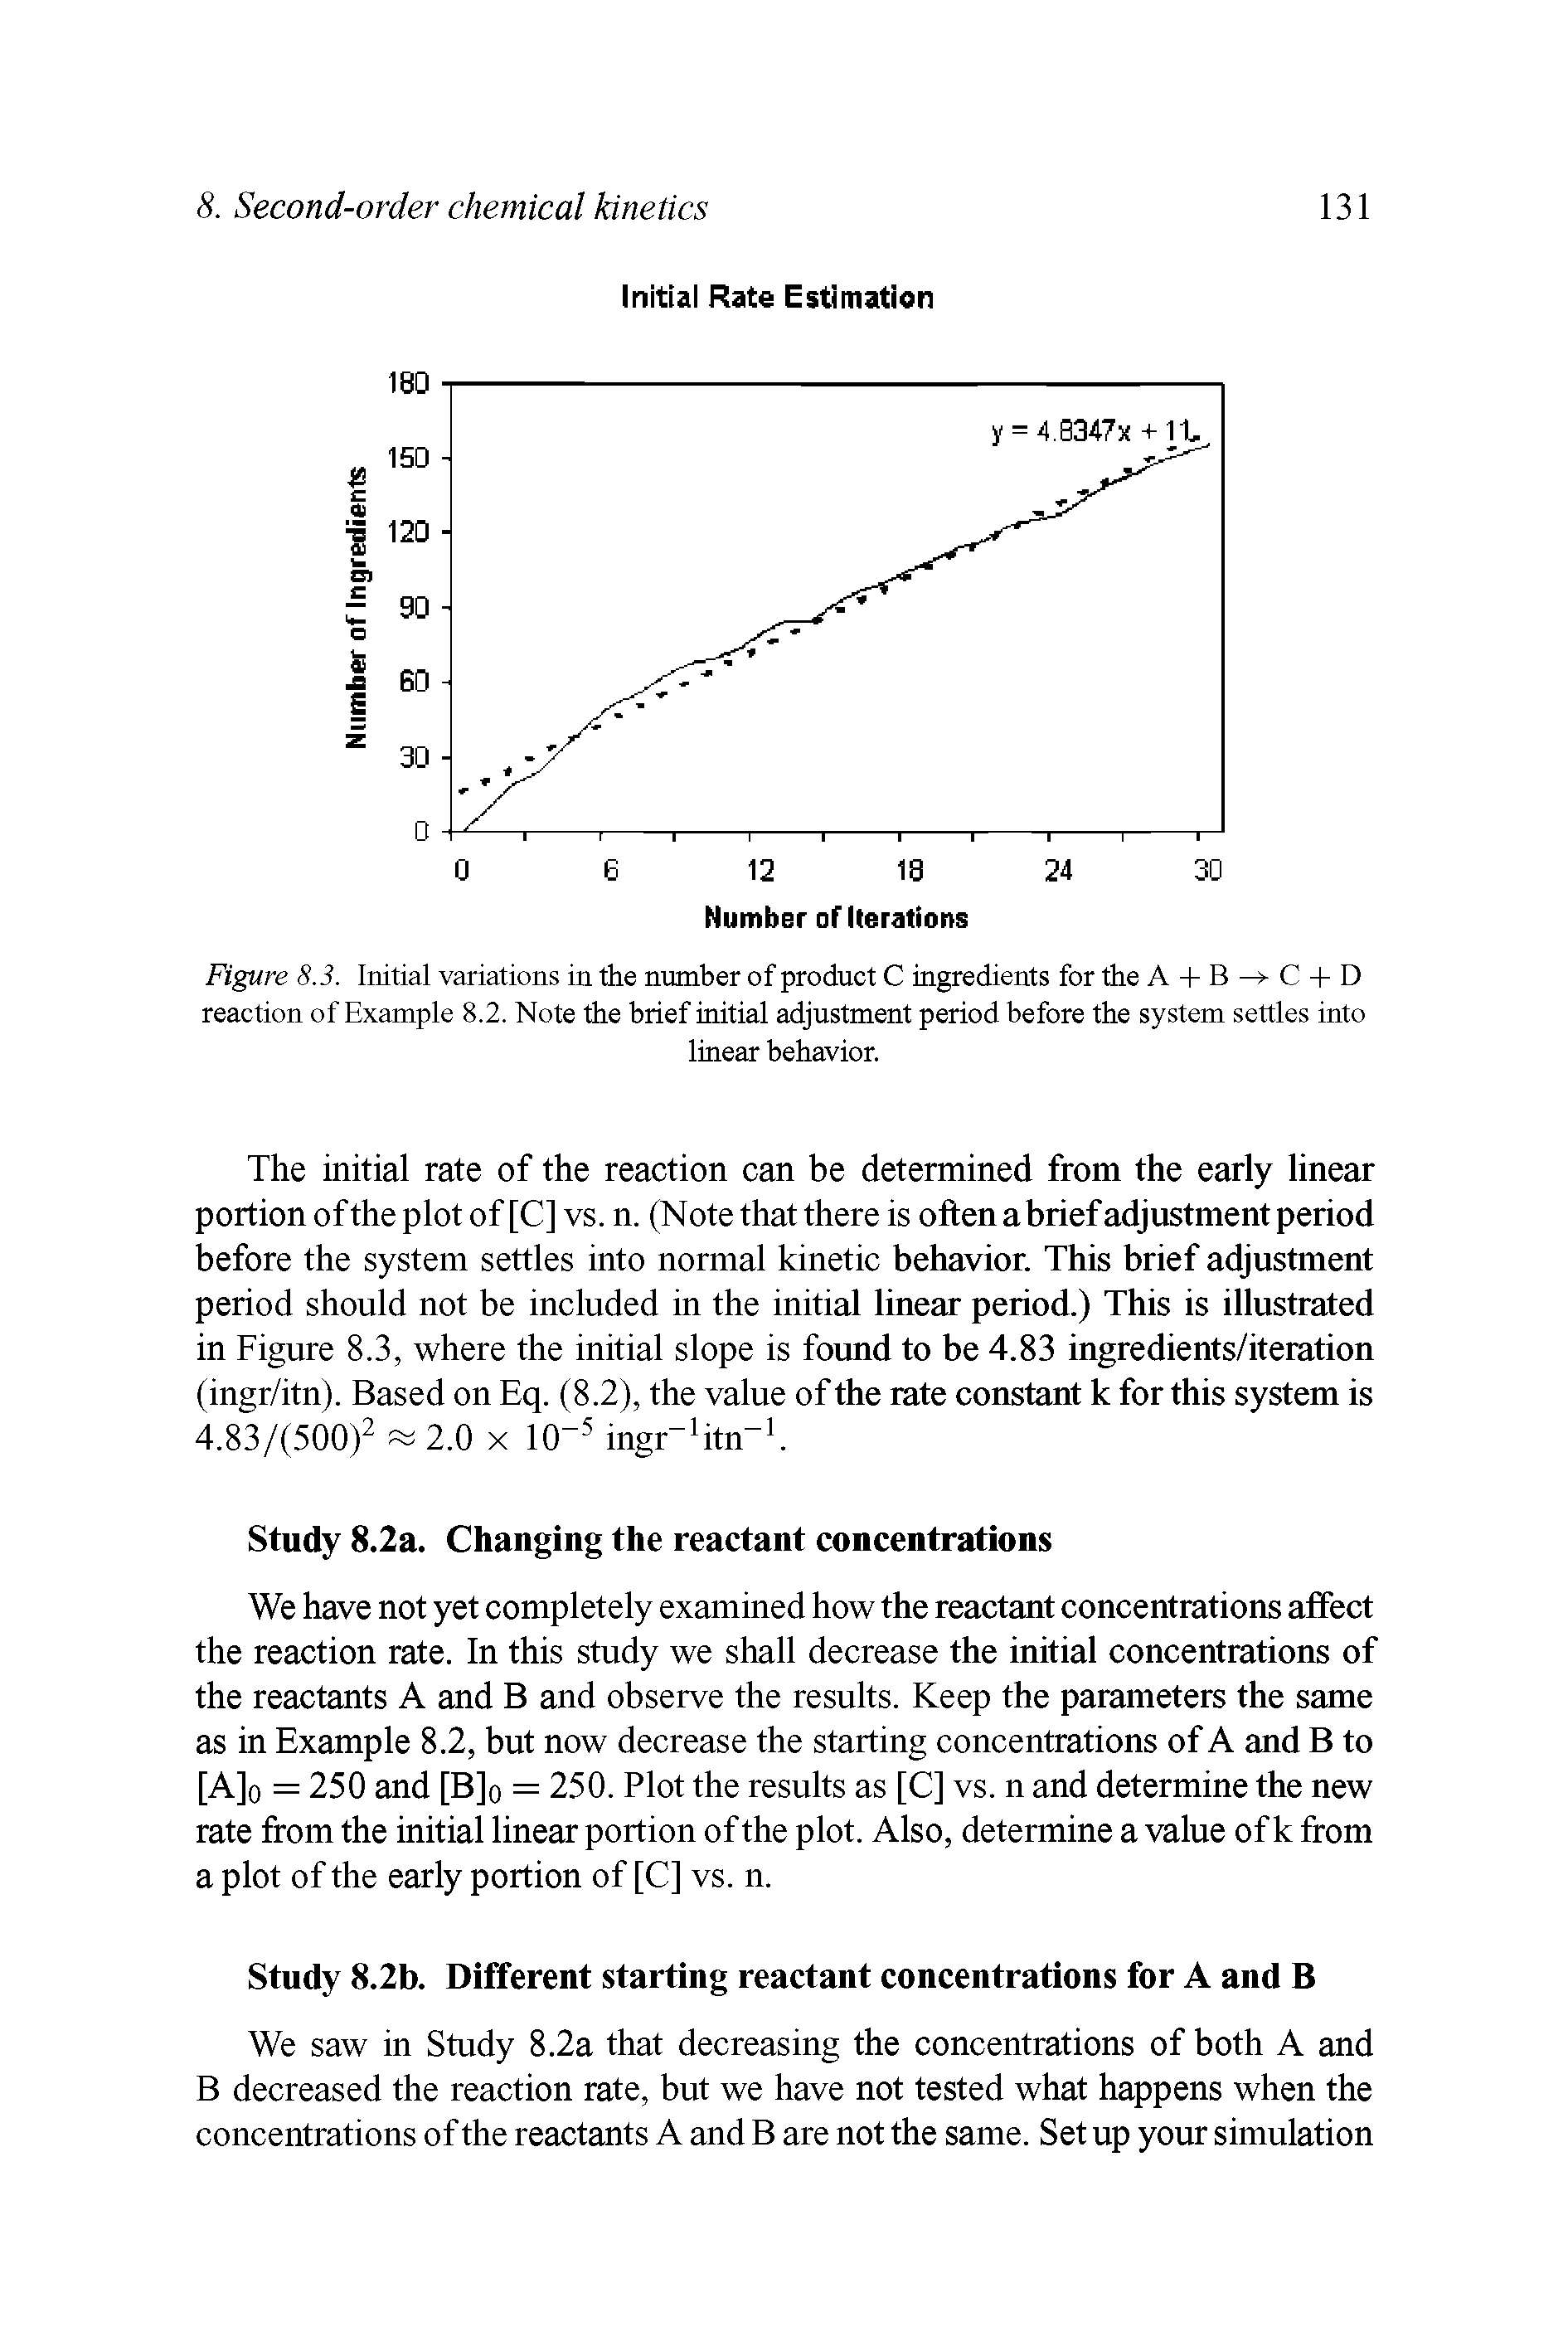 Figure 8.3. Initial variations in the number of product C ingredients for the A + B C + D reaction of Example 8.2. Note the brief initial adjustment period before the system settles into...